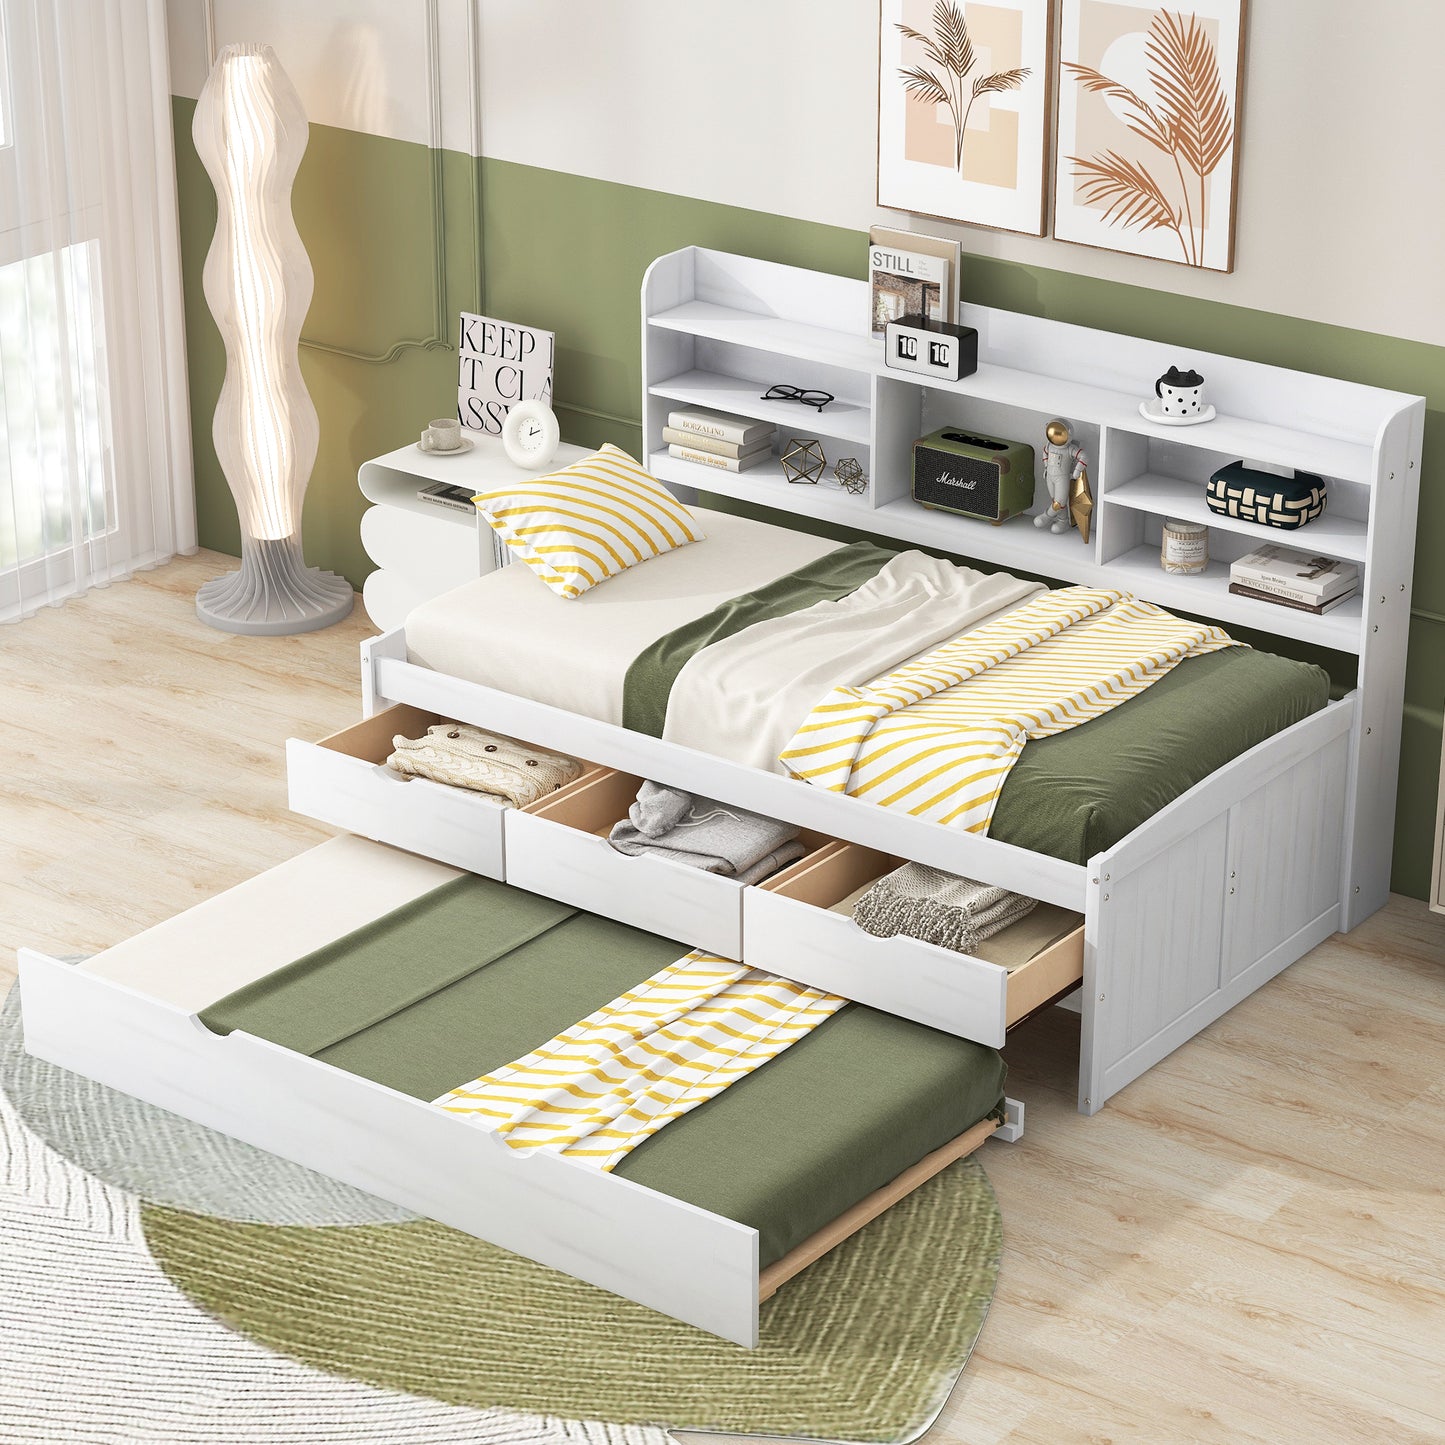 Twin Size Wooden Captain Platform Bed with Built-in Bookshelves, 3 Storage Drawers and Trundle, White Wash